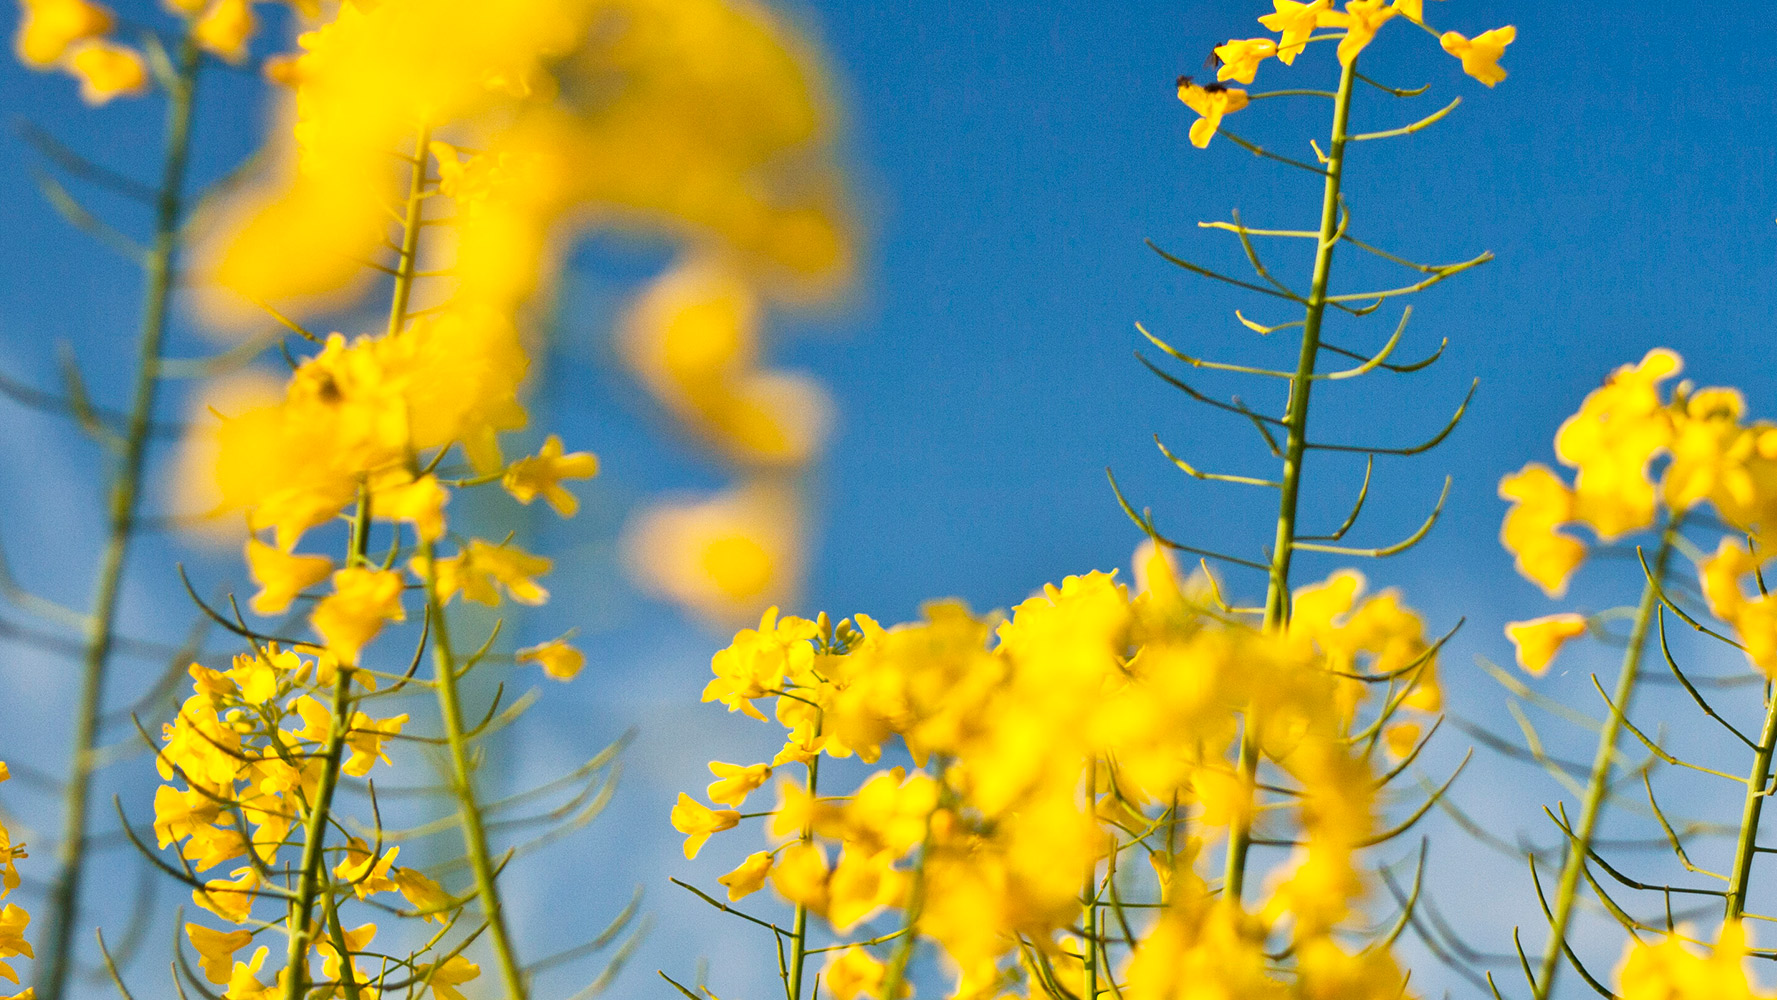 yellow flowers against blue sky background